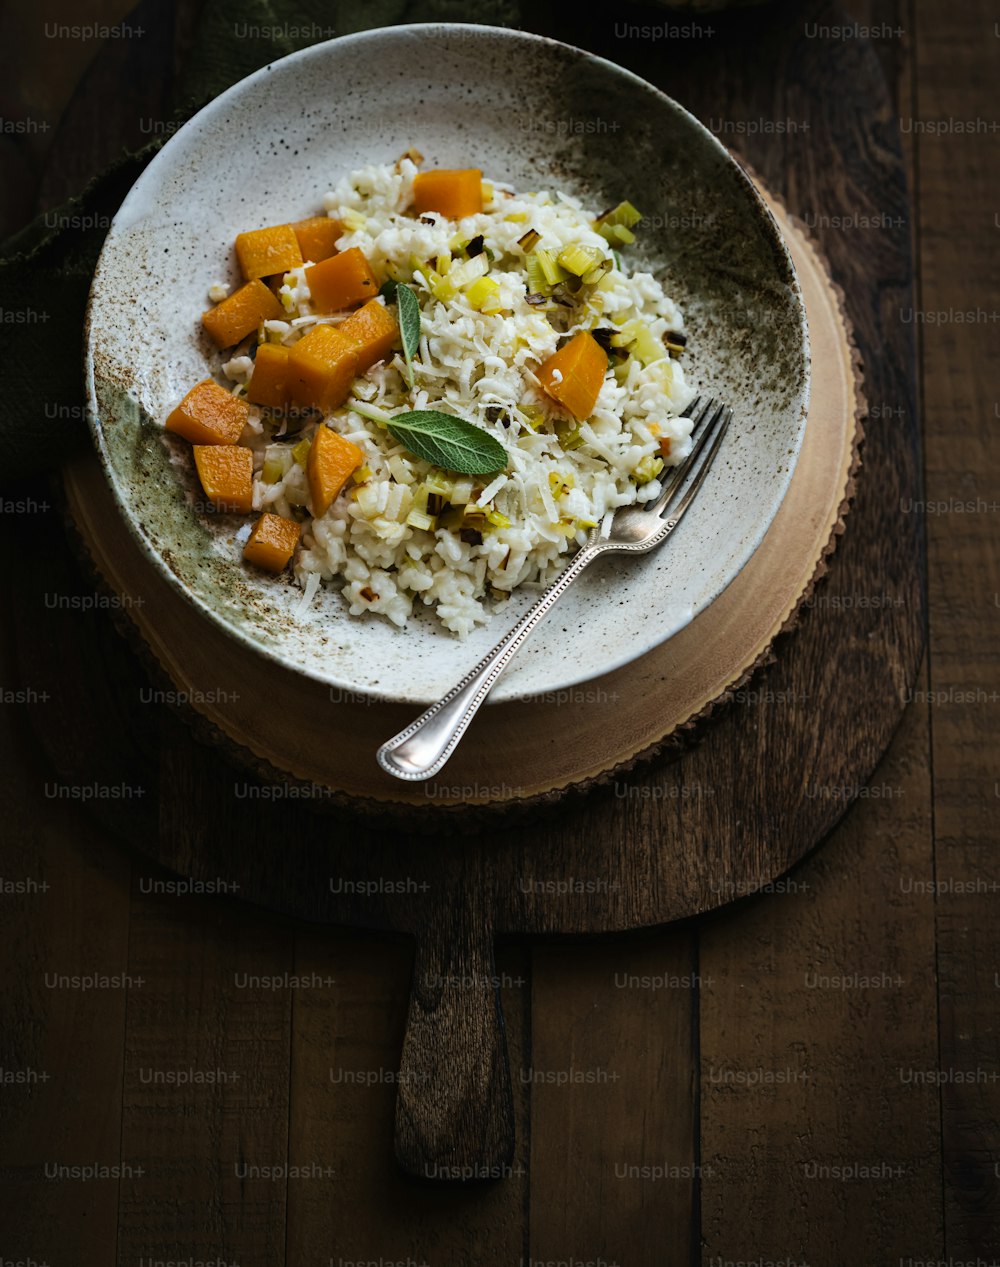 a bowl of rice and vegetables on a wooden table